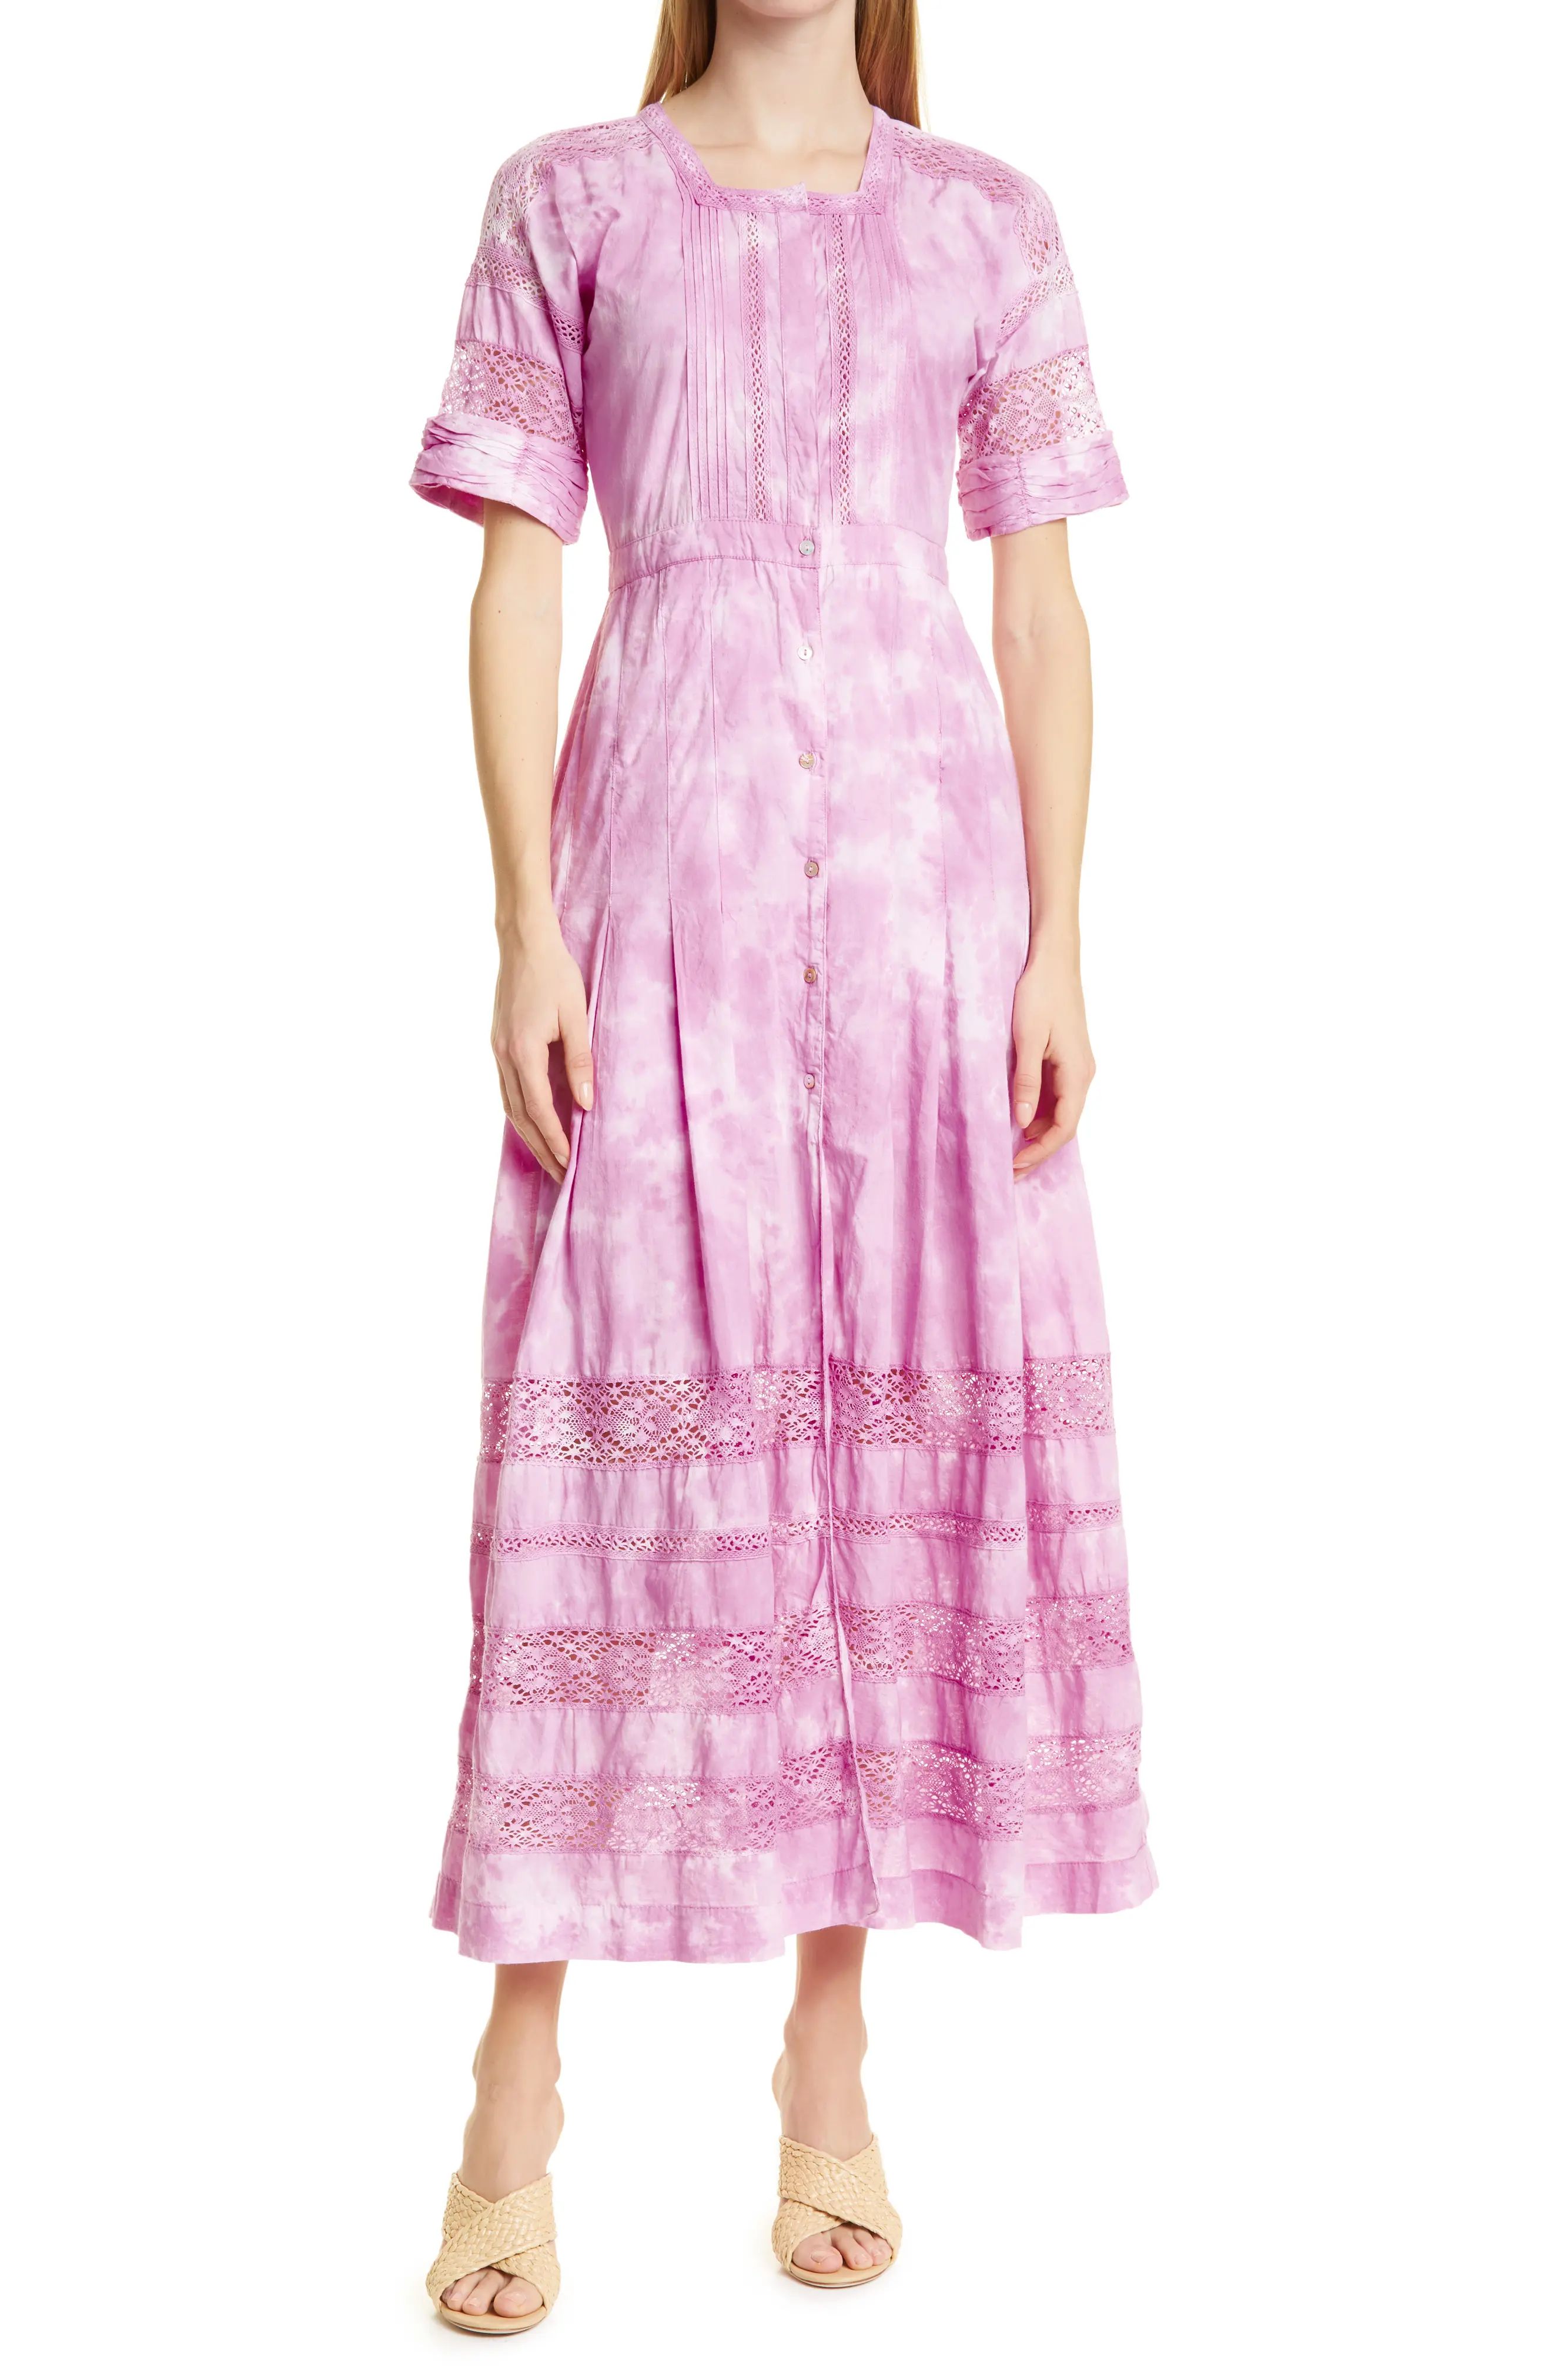 LoveShackFancy Edie Lace Inset Midi Dress in Begonia Hand Dye at Nordstrom, Size Large | Nordstrom